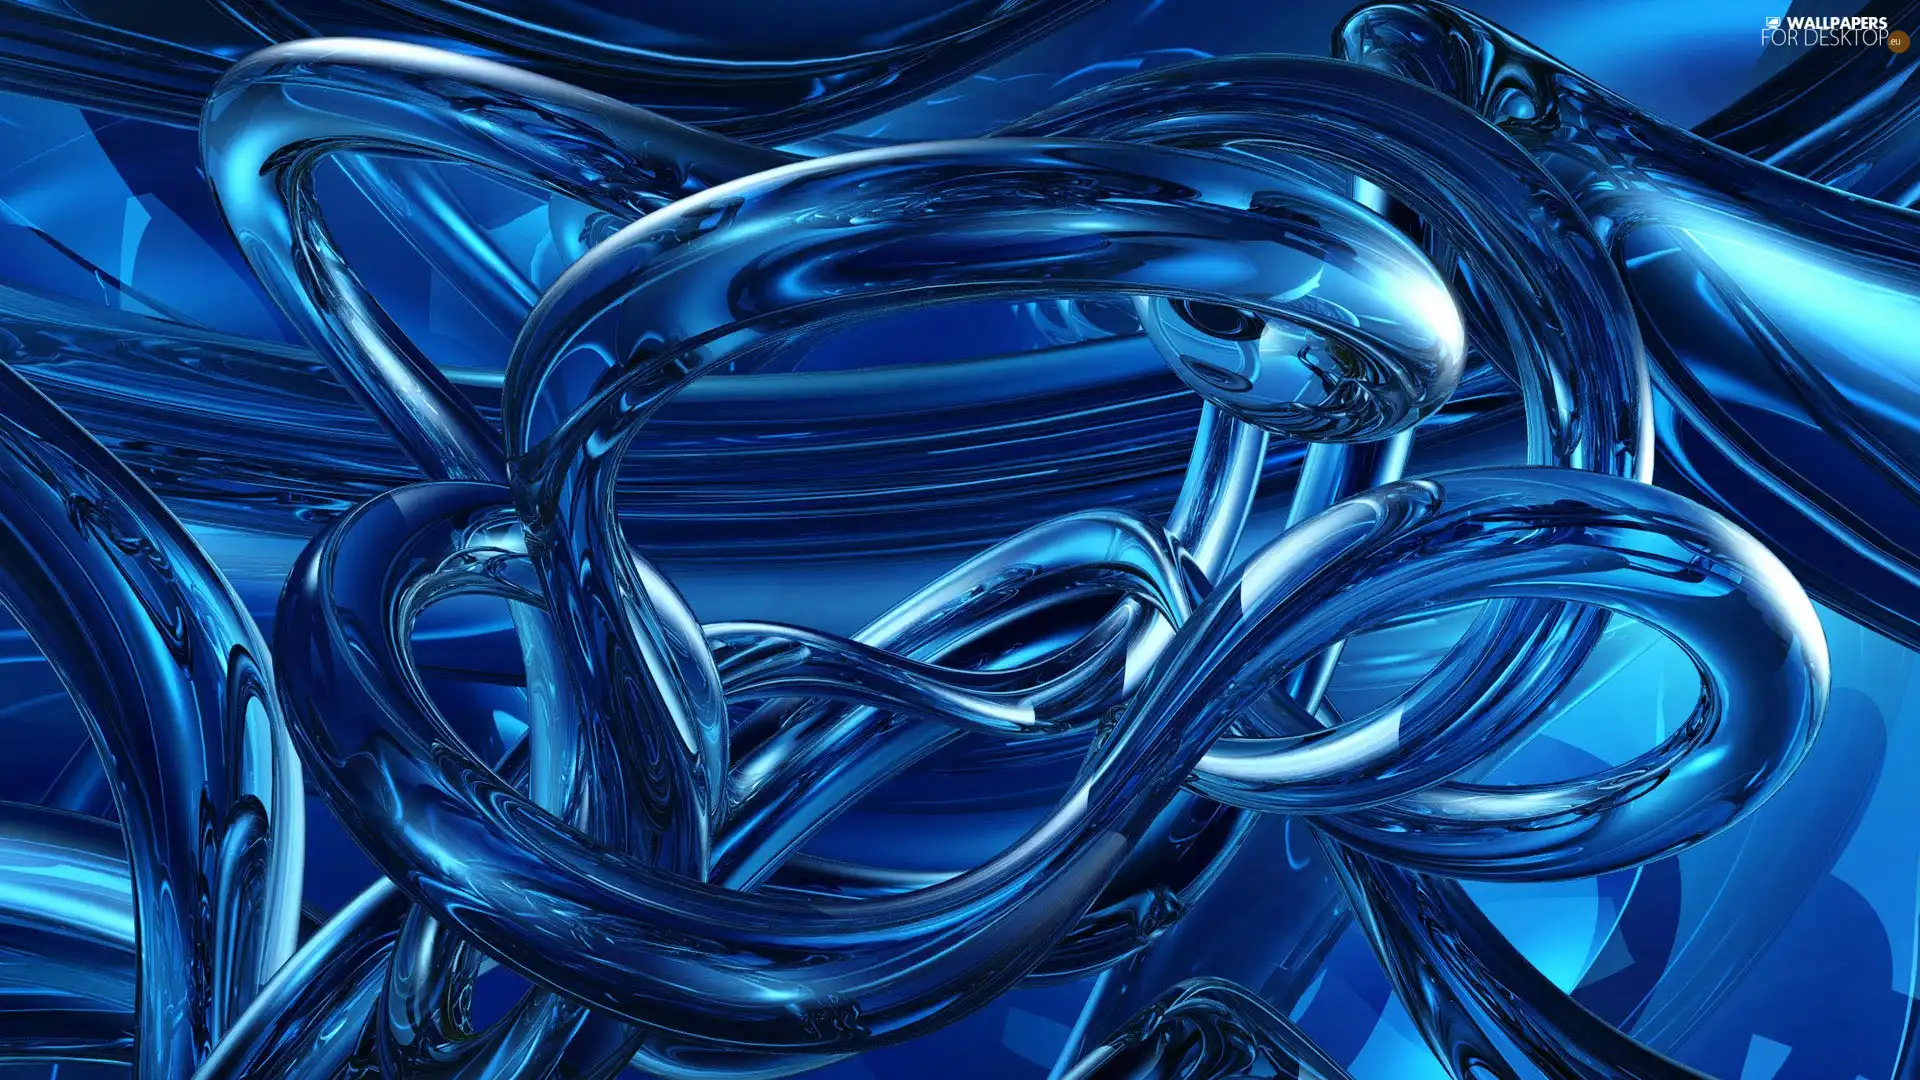 graphics, abstraction, Blue, tubing, twisted